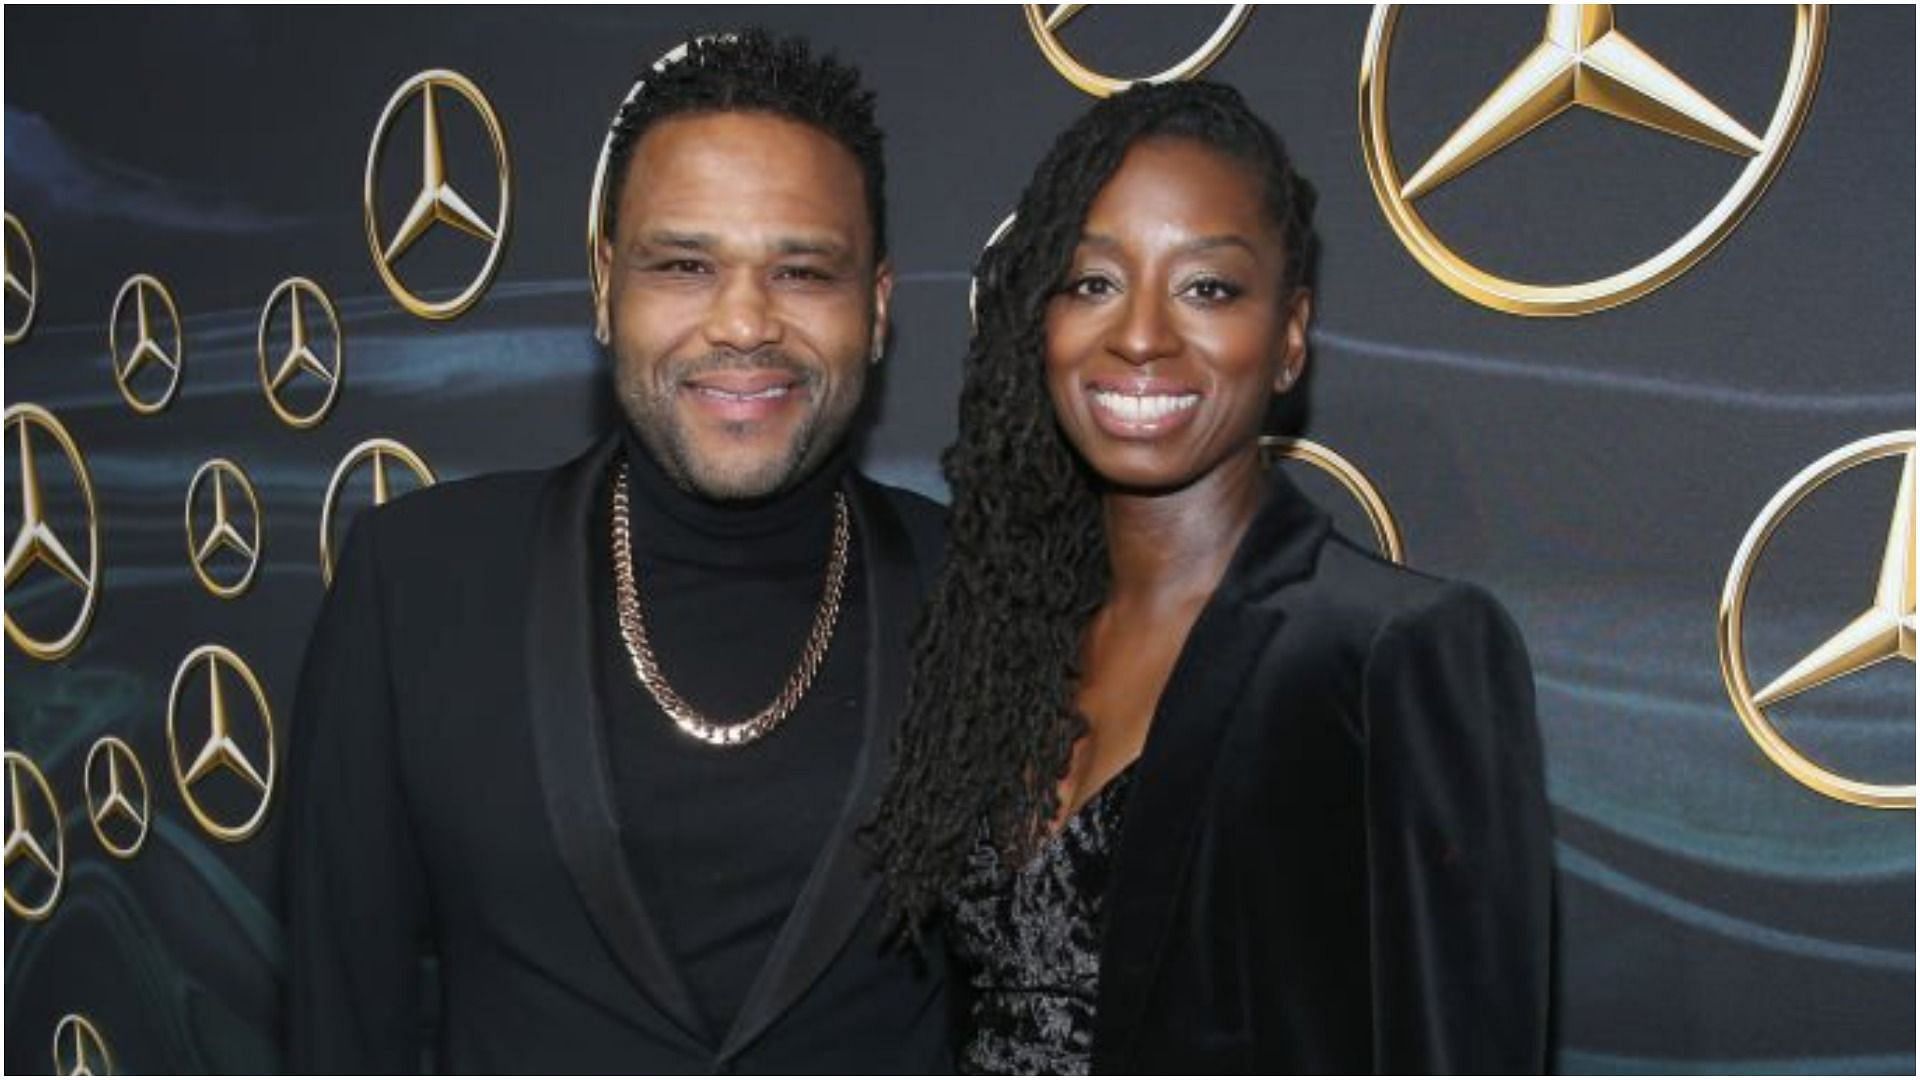 Alvina Anderson has filed for divorce from her husband, Anthony Anderson (Image via Phillip Faraone/Getty Images)